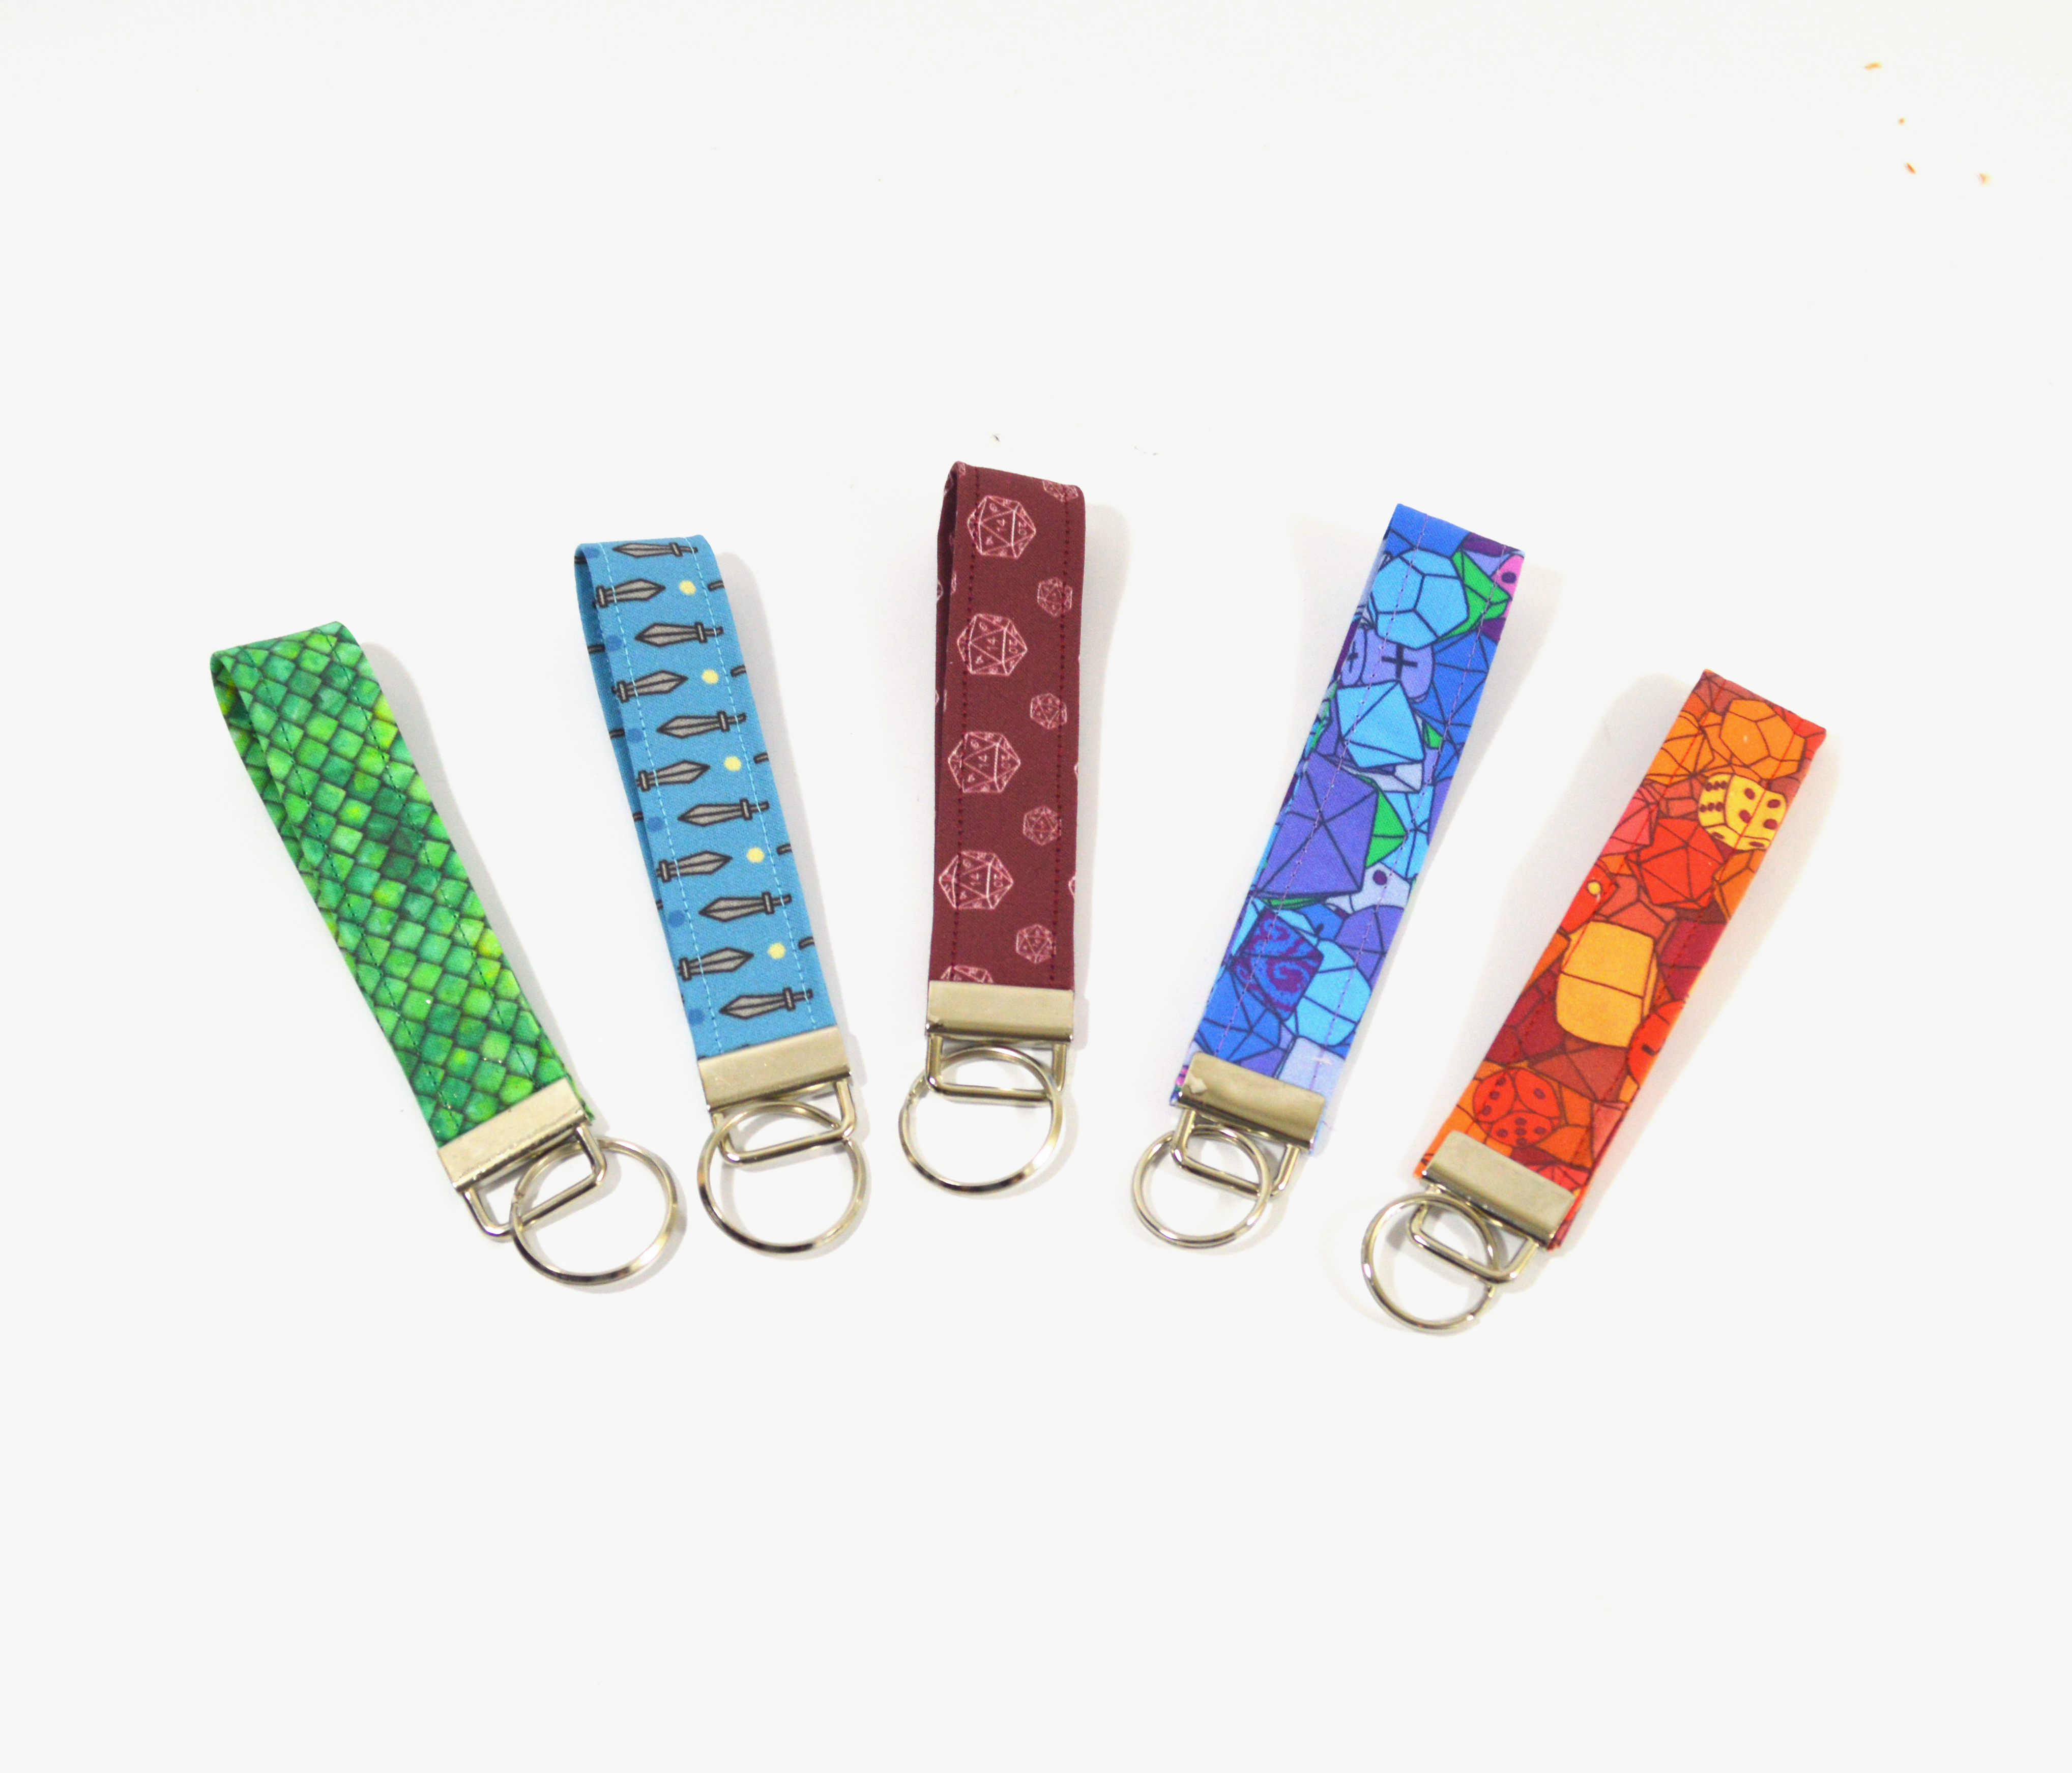 A set of 5 fabric fob keychains, each in a different nerdy color and design.